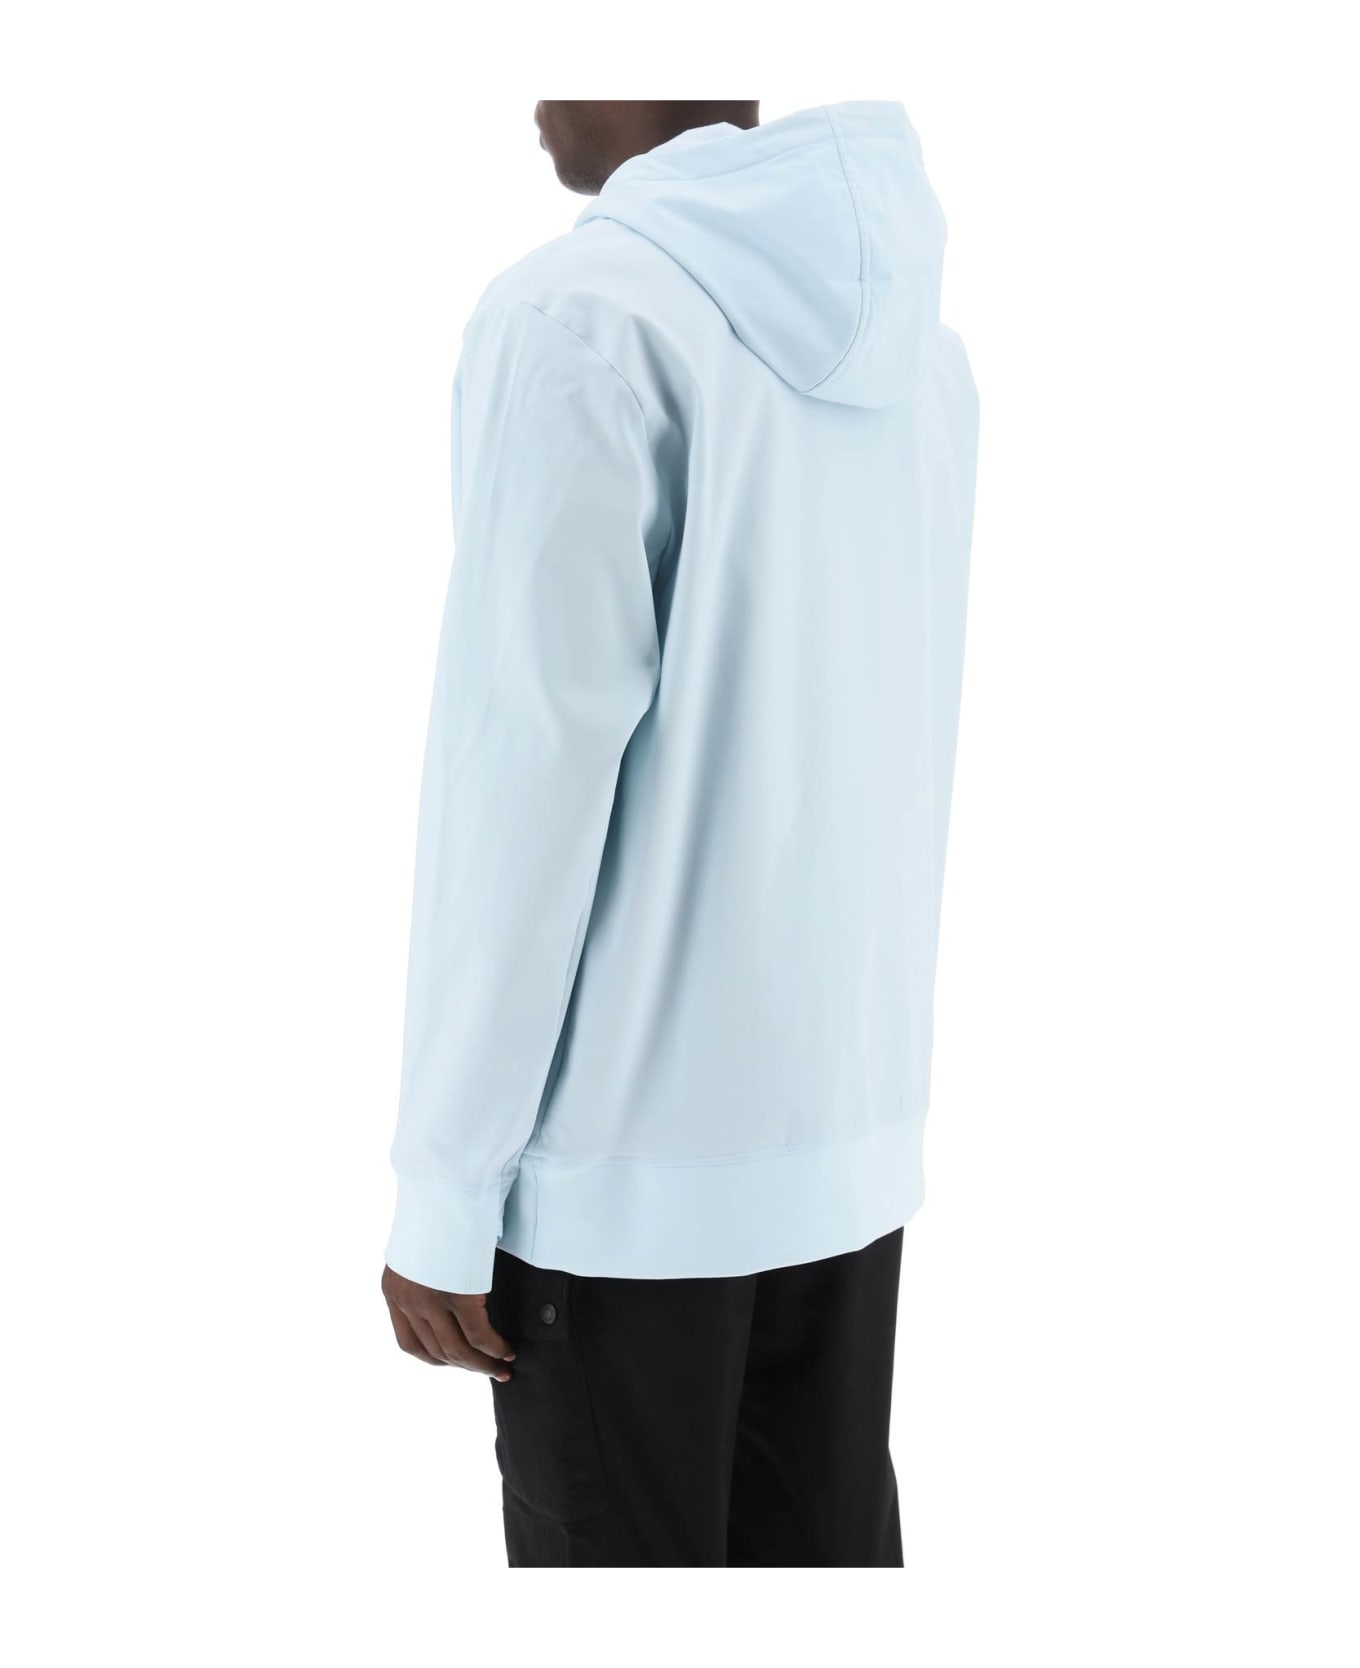 The North Face Techno Hoodie With Logo Print - ICECAP BLUE (Light blue) フリース